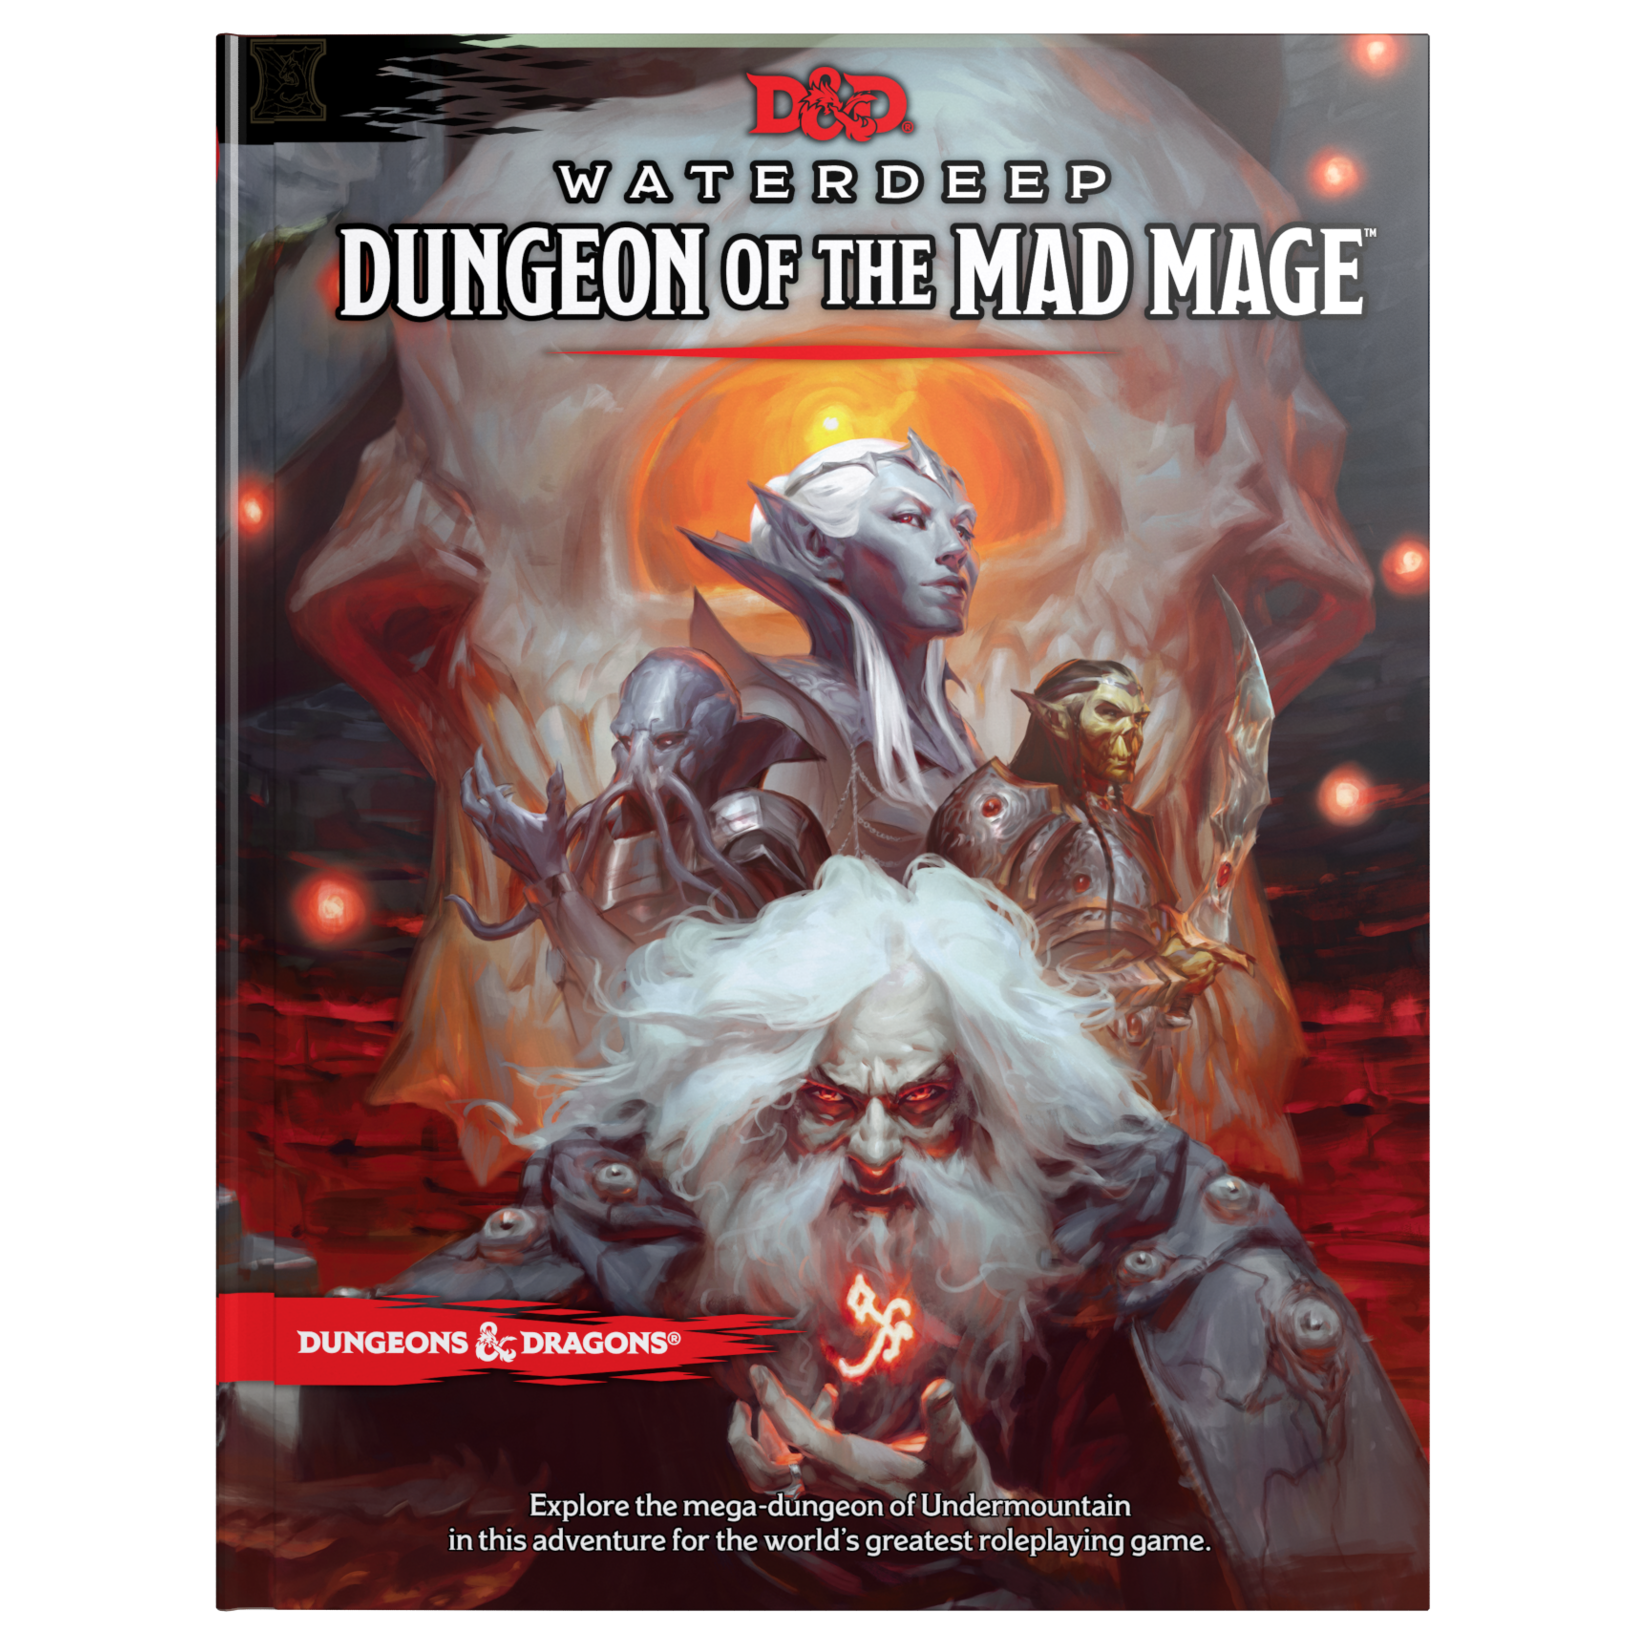 Wizards of the Coast Waterdeep Dungeon of the Mad Mage